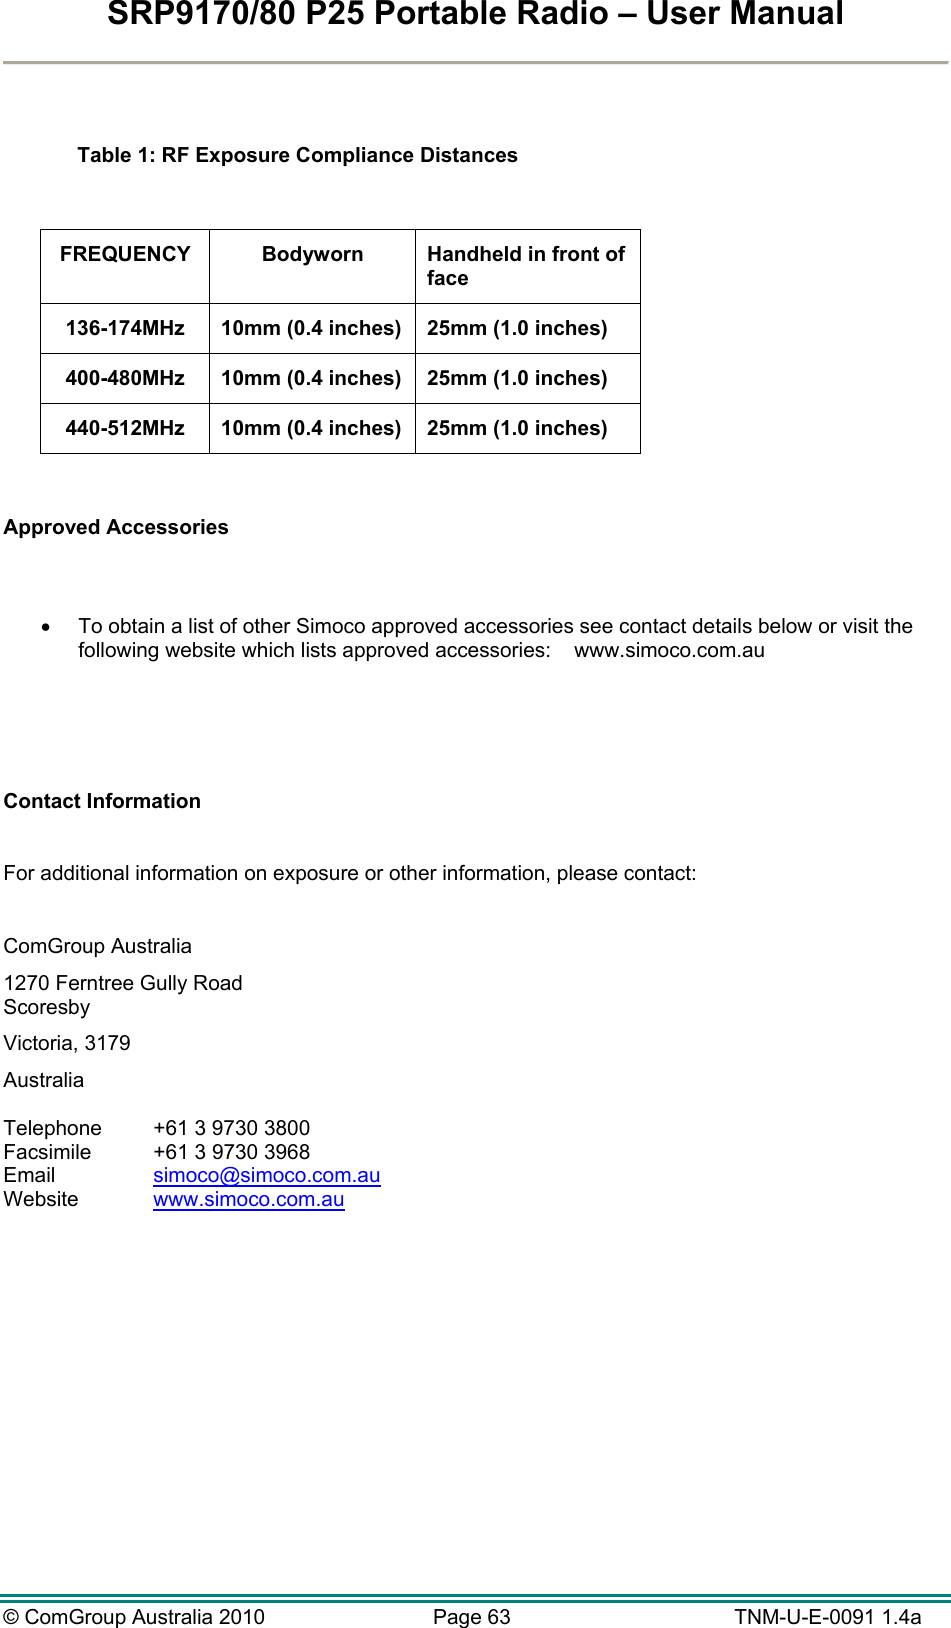 SRP9170/80 P25 Portable Radio – User Manual  © ComGroup Australia 2010  Page 63   TNM-U-E-0091 1.4a    Table 1: RF Exposure Compliance Distances  FREQUENCY  Bodyworn  Handheld in front of face 136-174MHz  10mm (0.4 inches)  25mm (1.0 inches) 400-480MHz  10mm (0.4 inches)  25mm (1.0 inches) 440-512MHz  10mm (0.4 inches)  25mm (1.0 inches)  Approved Accessories     To obtain a list of other Simoco approved accessories see contact details below or visit the following website which lists approved accessories:    www.simoco.com.au     Contact Information  For additional information on exposure or other information, please contact:  ComGroup Australia 1270 Ferntree Gully Road Scoresby Victoria, 3179 Australia  Telephone  +61 3 9730 3800 Facsimile  +61 3 9730 3968 Email   simoco@simoco.com.au  Website  www.simoco.com.au   